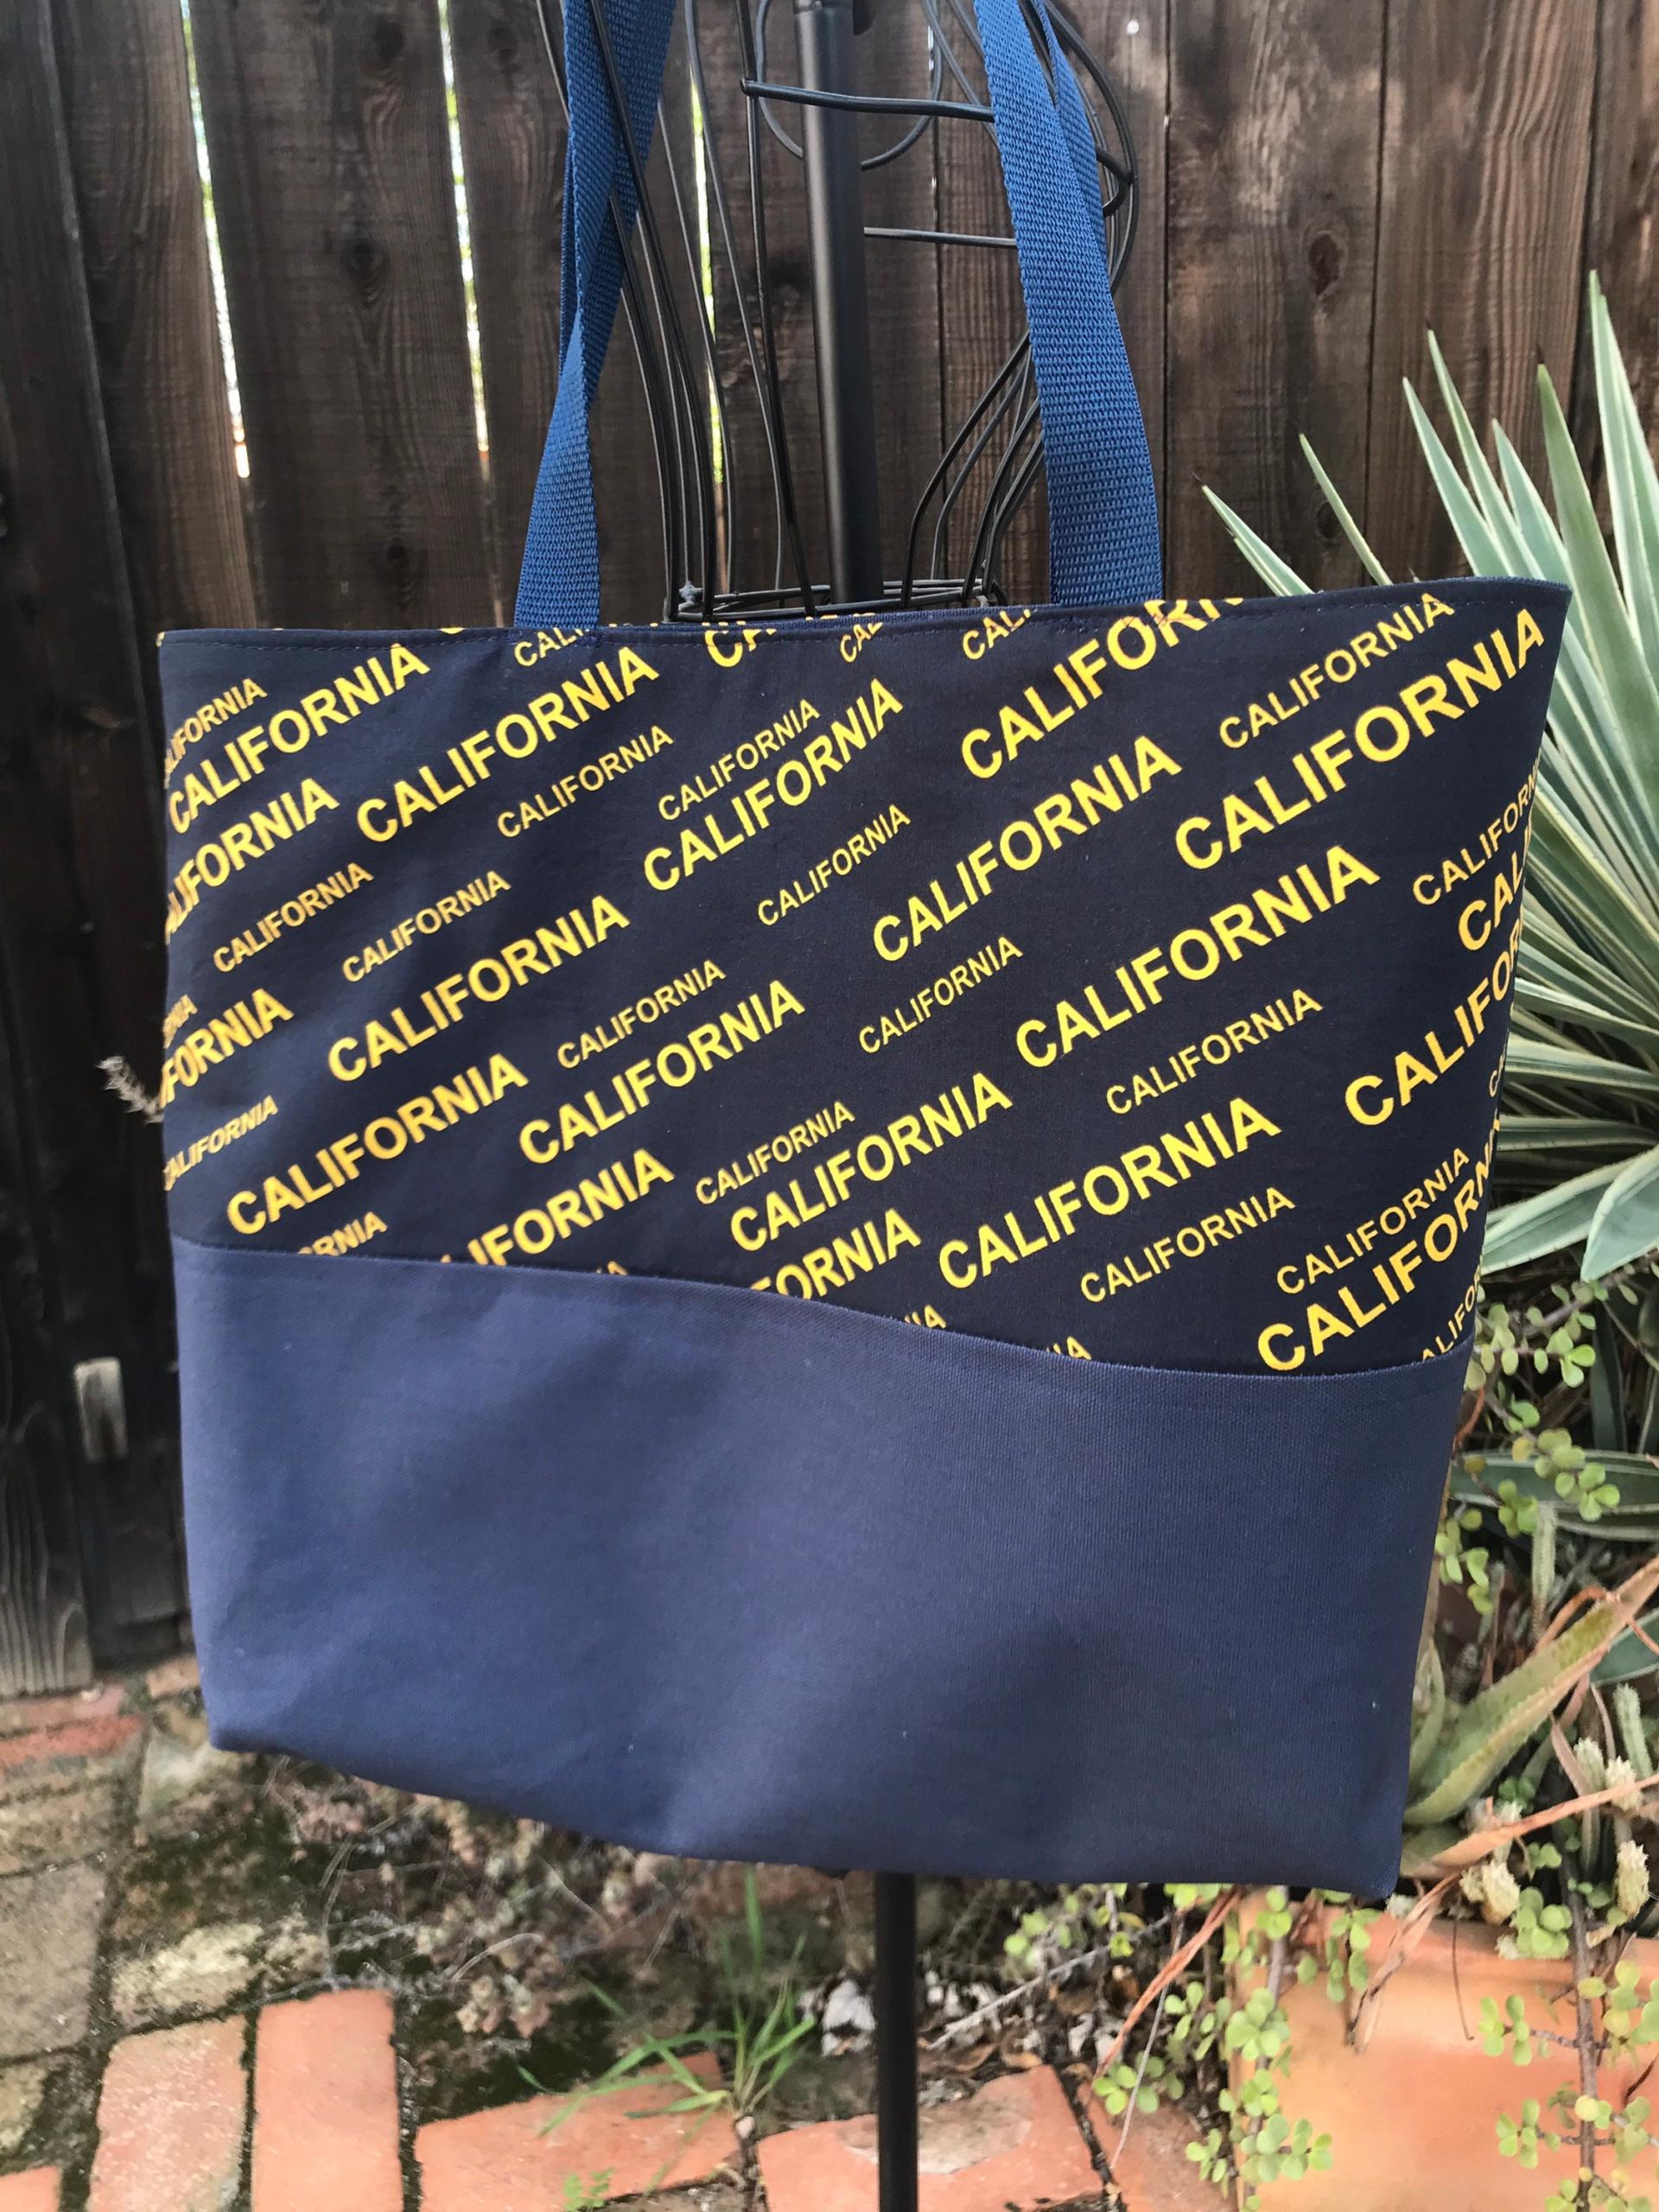 California canvas tote bag, sturdy shopping market bag, grocery bag, travel bag, golden state